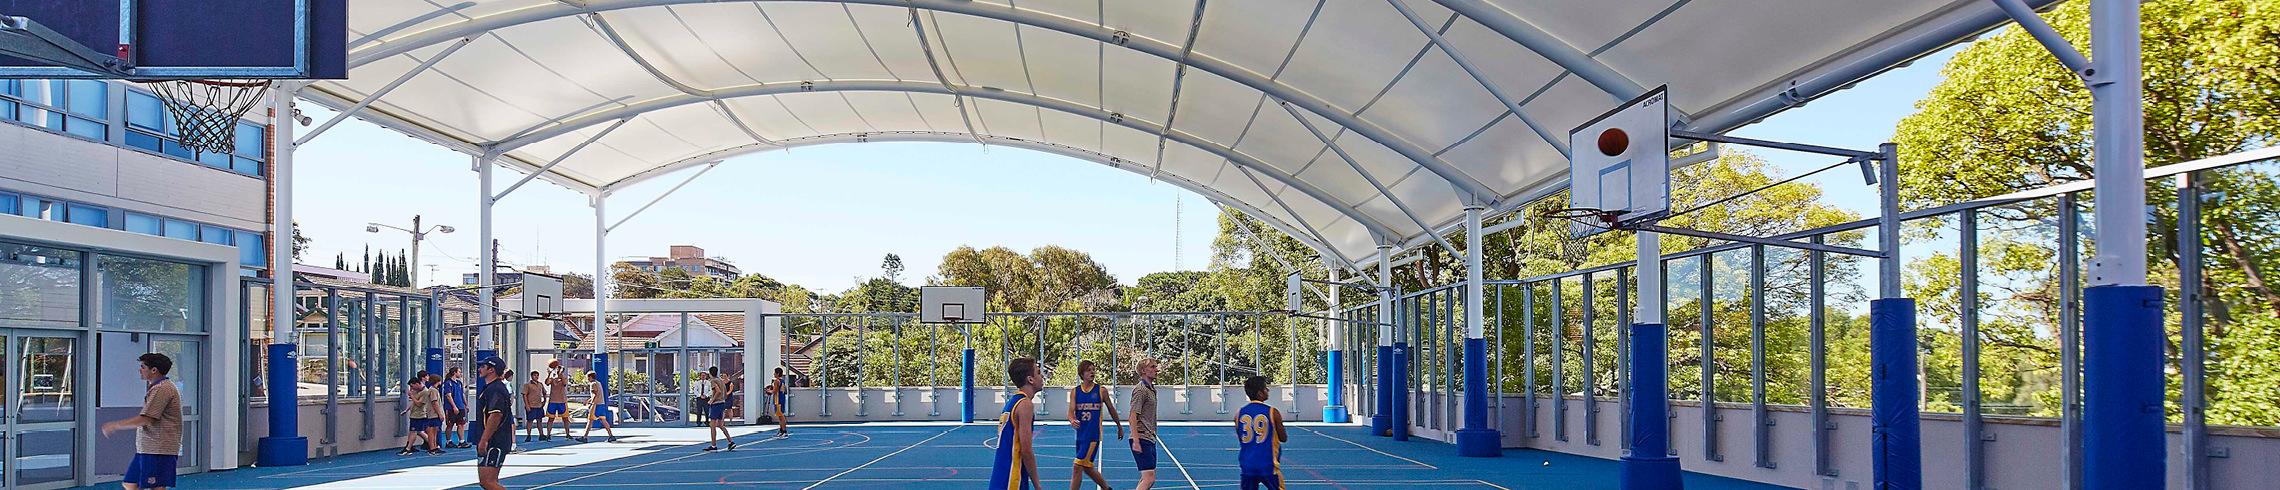 Sports Canopy to cover multiple basketball courts - Waverley College Rooftop Basketball Court Interior